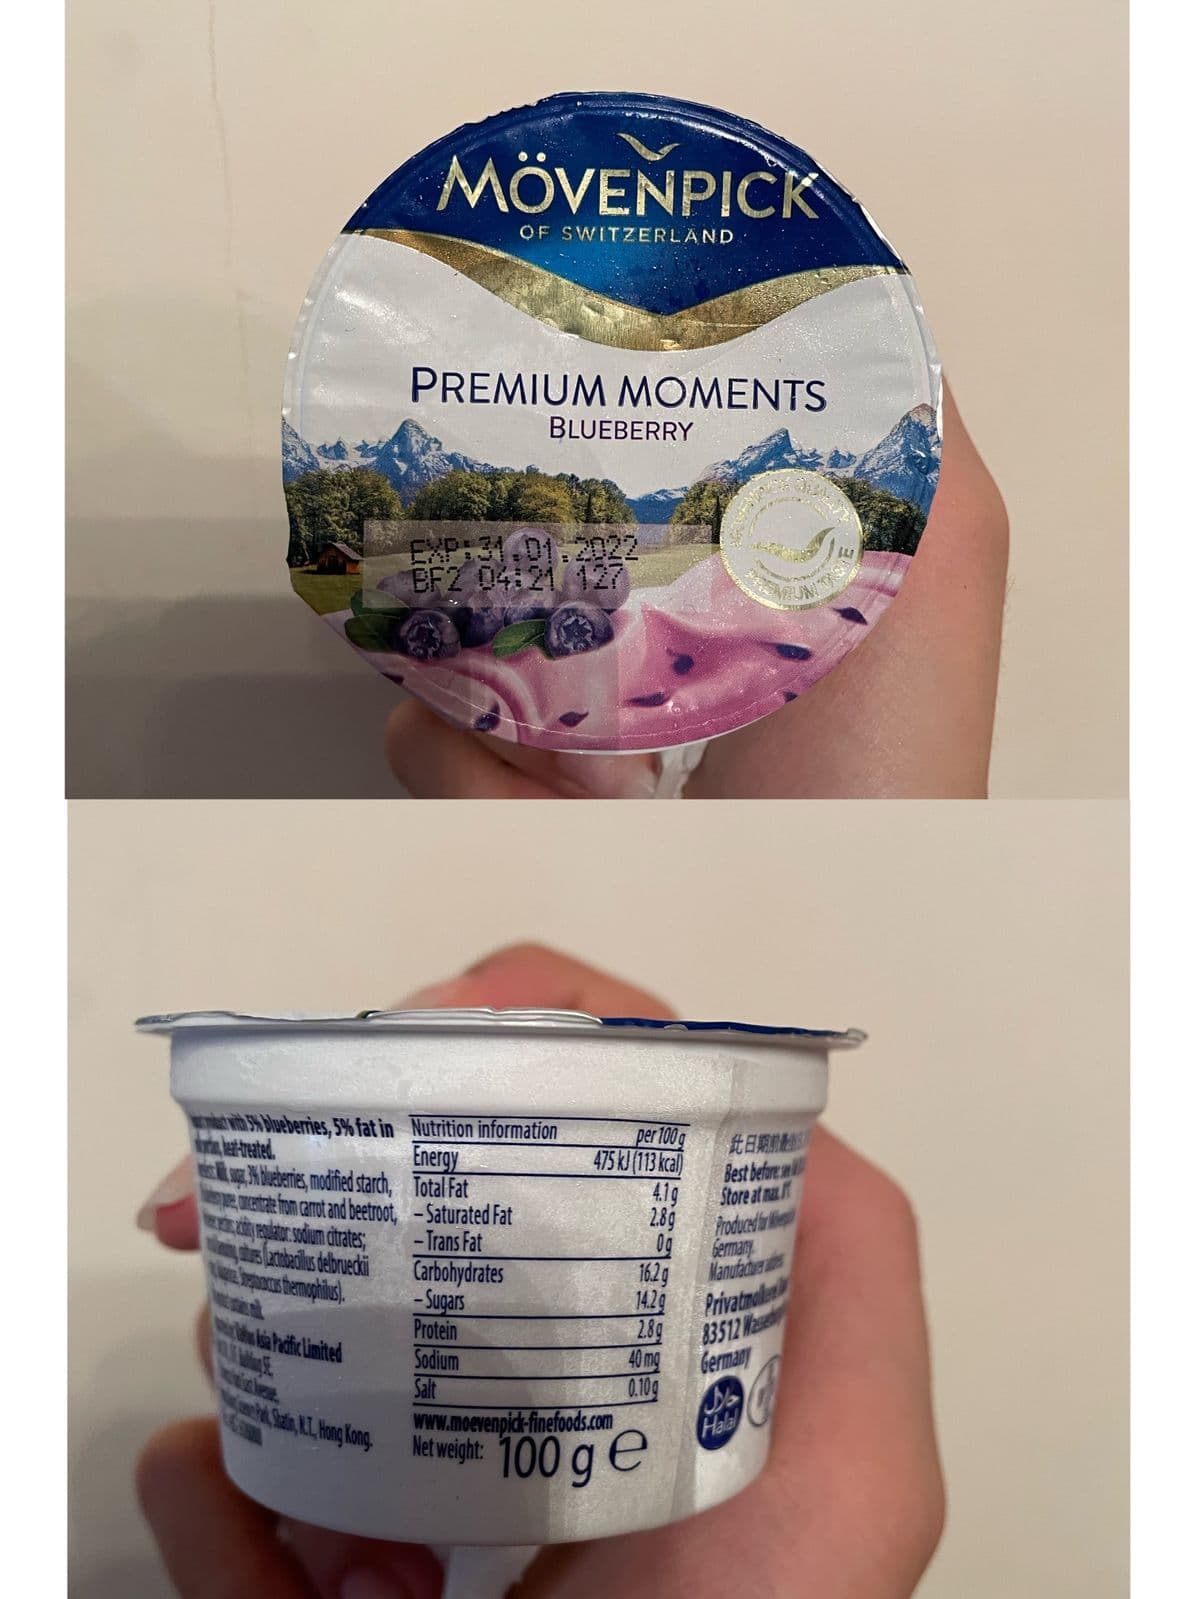 NOVENPICK
OF SWITZERLAND
PREMIUM MOMENTS
BLUEBERRY
EXP:31.01.202
BF2 04:21 127
UN
3 lueberries, 5% fat in Nutrition information
ear-reated.
per 100g
475 kJ(113 ka)
此日期
Best before w
iri
ighicderie, modfied sarch, Total Fat
DEtRetfom canot and beetrot, - Saturated Fat
di adator sodum dtrates;
anbealus debruedki
s hemophilus).
Energy
4.1g
Store at ma.
2.89
froduced r
0g
bermary
16.2g
-Trans Fat
Carbohydrates
- Sugars
Protein
Sodium
Salt
Manufaduer
14.2g
Privatmale
28g
83512 Wae
40mg
i afic Limited
Germany
0.10g
San, L, Hong Kong
www.moevenpick-finefoods.com
Net weight:
Hala
100 ge
